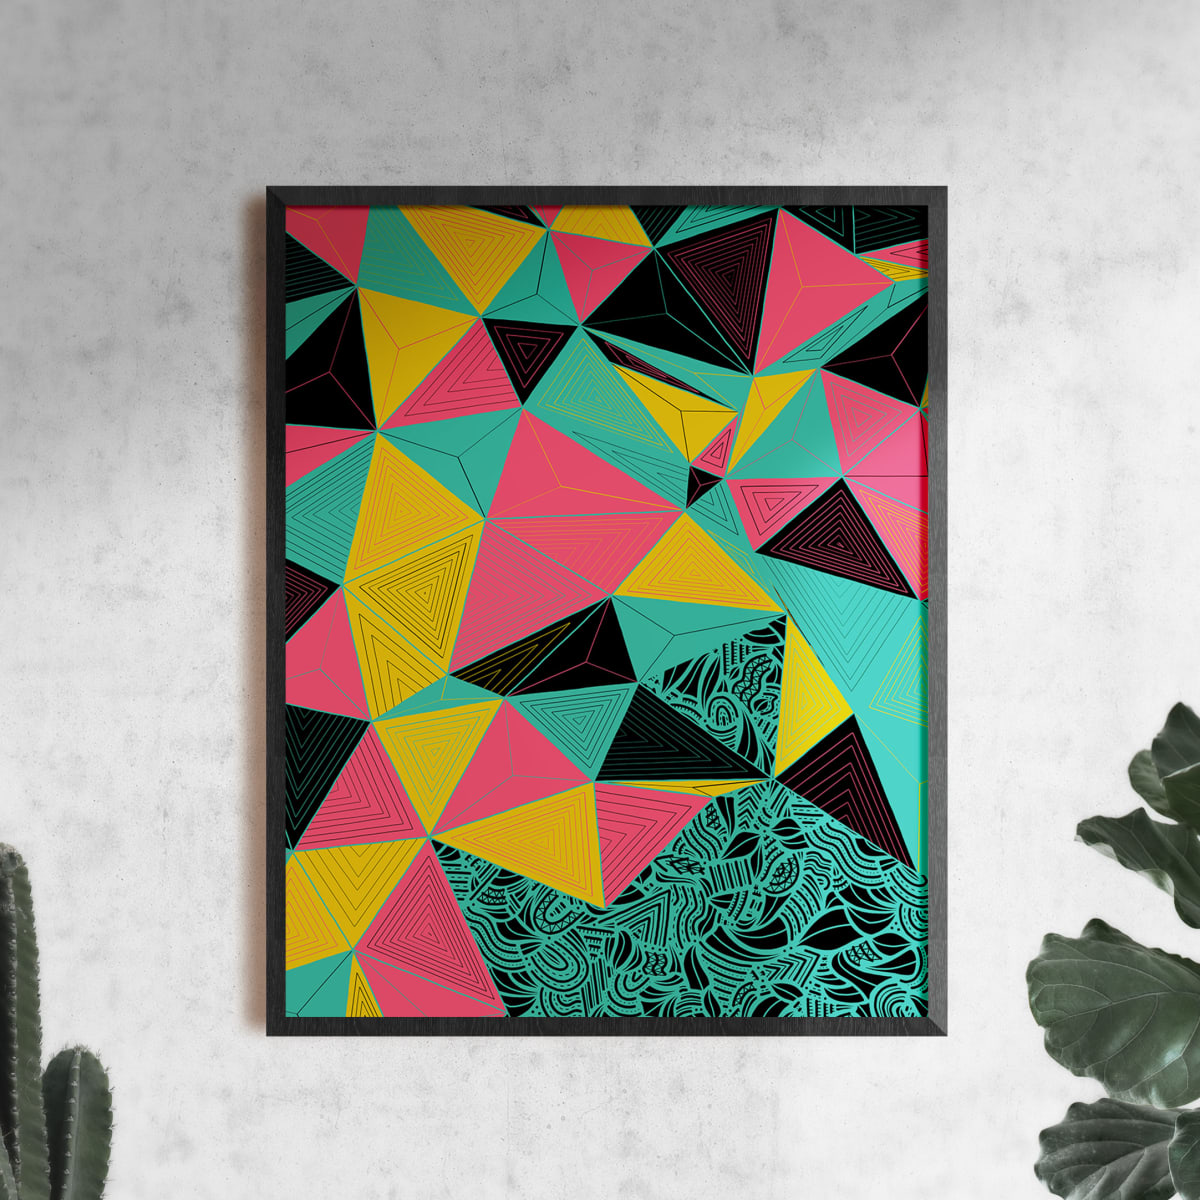 "Conscious Growth 081" Large One-of-a-Kind Print by Debbie Clapper  Image: Conscious Growth Print 081, a green, pink, yellow, black and white one of a kind archival modern art print